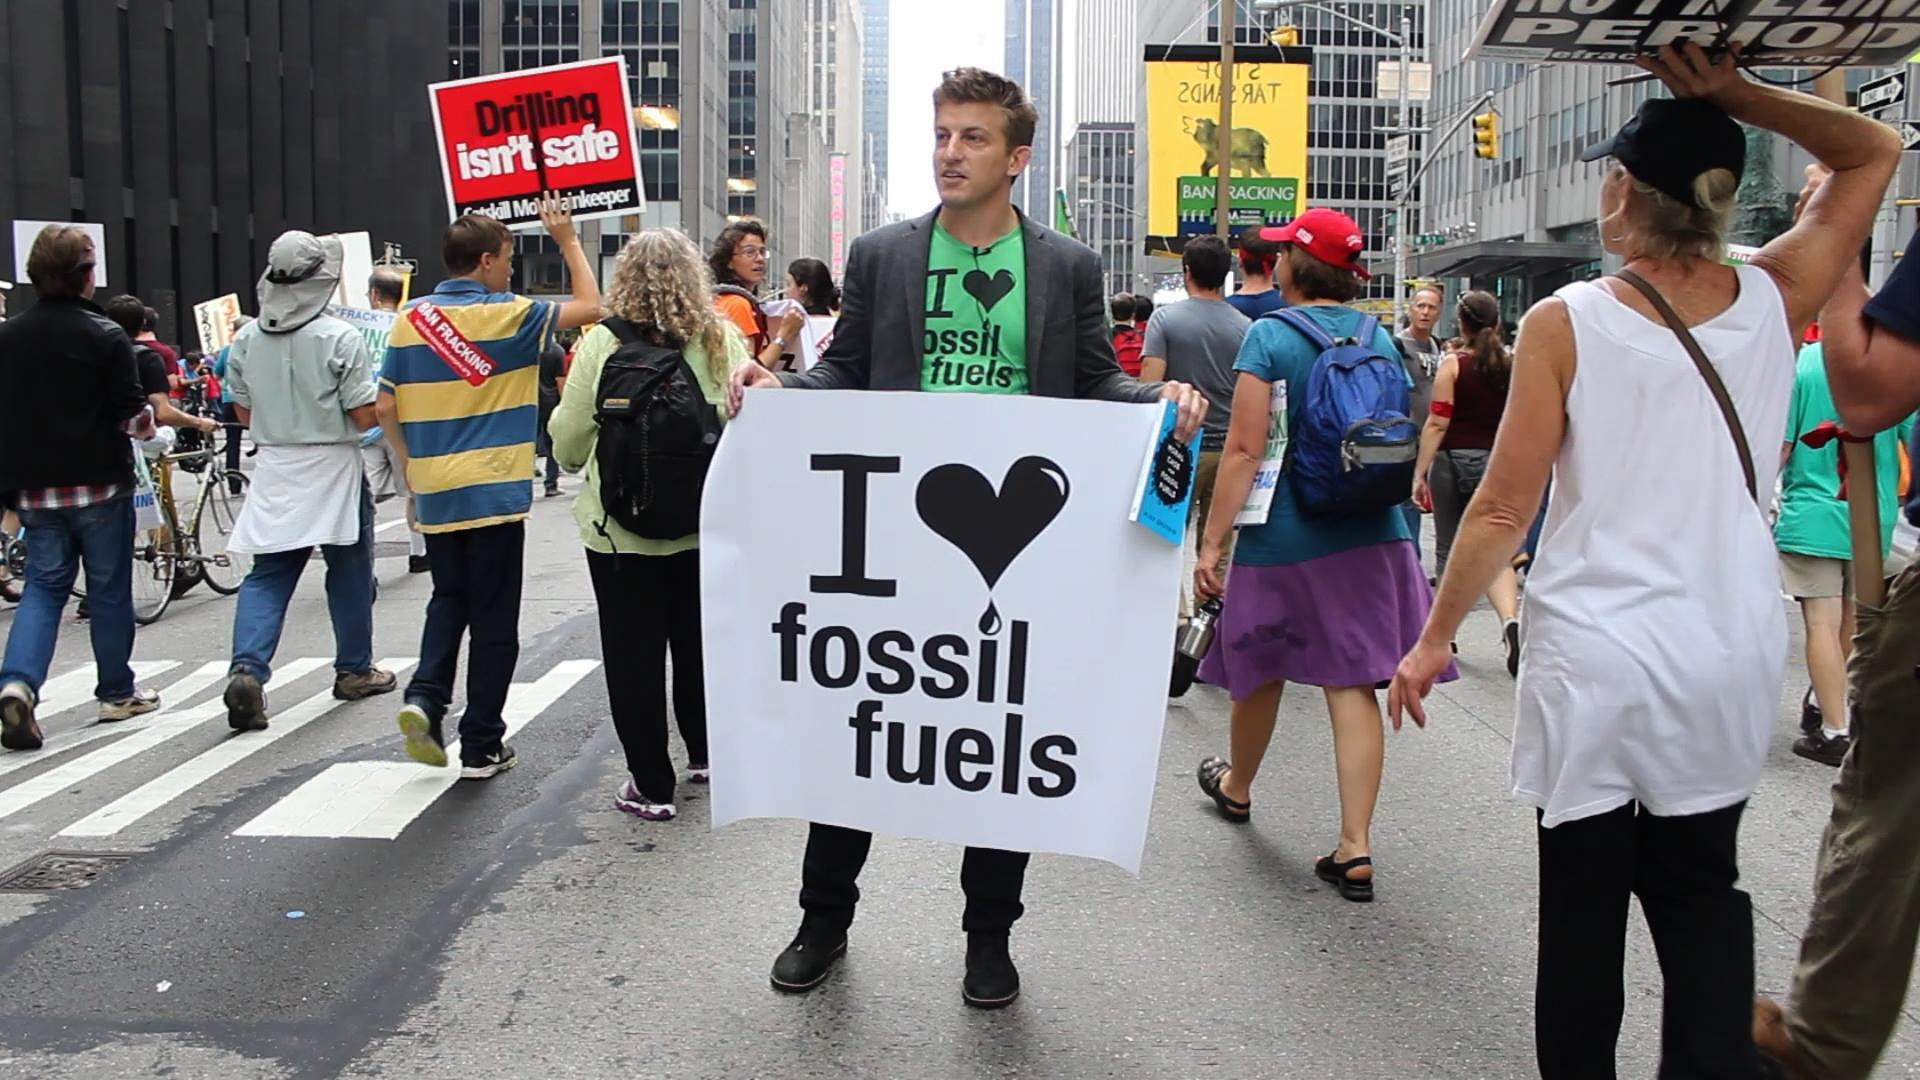 Alex at Climate March